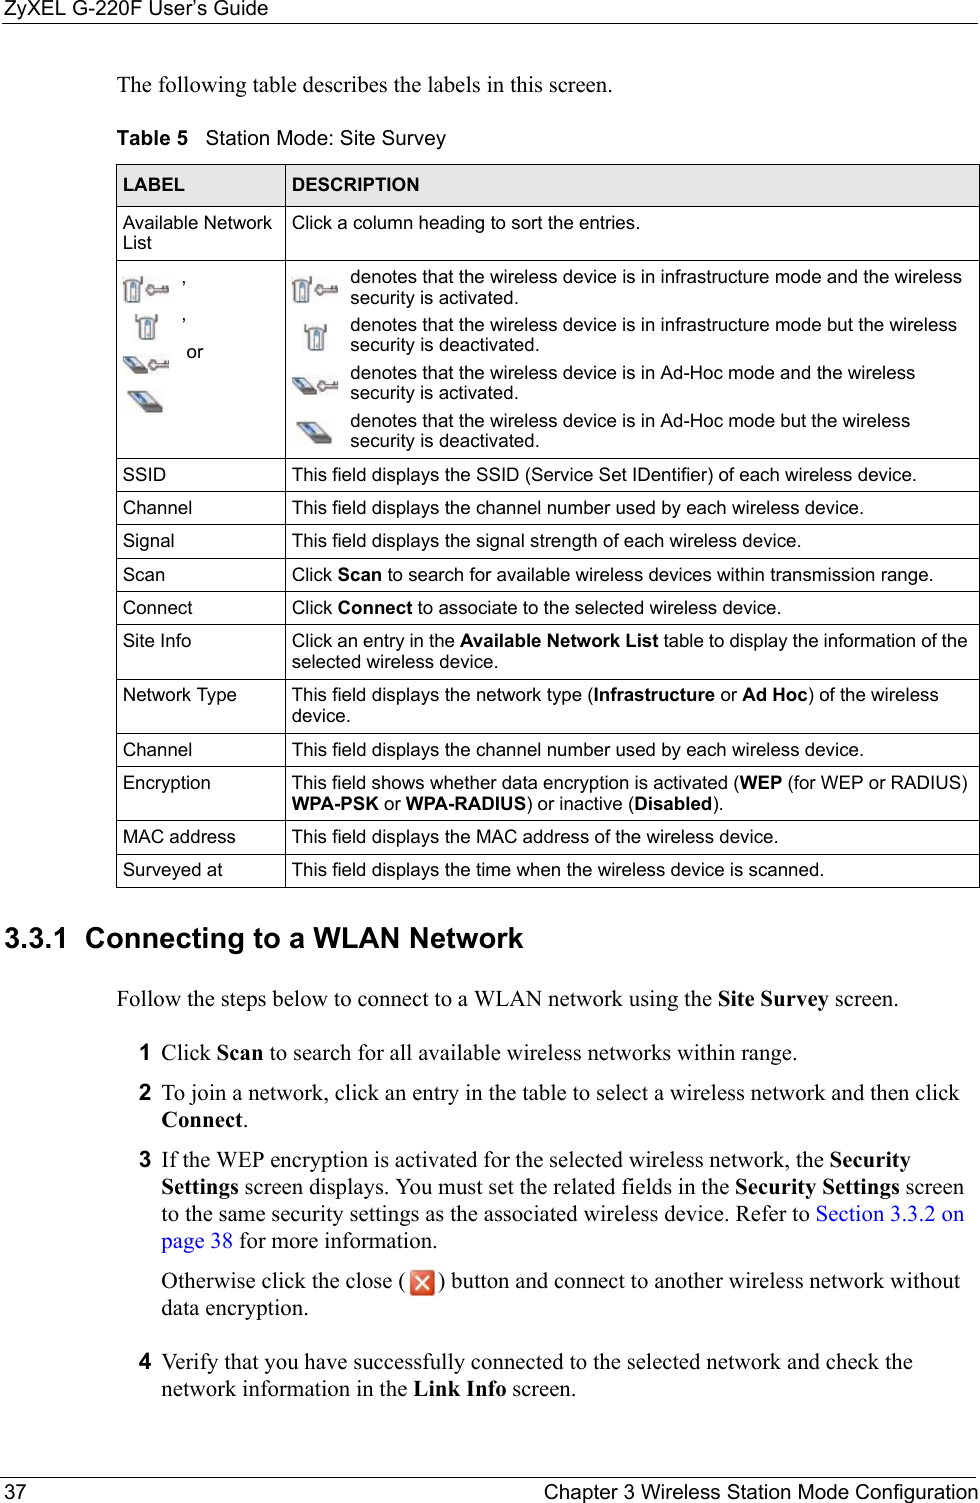 ZyXEL G-220F User’s Guide37 Chapter 3 Wireless Station Mode ConfigurationThe following table describes the labels in this screen. 3.3.1  Connecting to a WLAN NetworkFollow the steps below to connect to a WLAN network using the Site Survey screen.1Click Scan to search for all available wireless networks within range.2To join a network, click an entry in the table to select a wireless network and then click Connect.3If the WEP encryption is activated for the selected wireless network, the Security Settings screen displays. You must set the related fields in the Security Settings screen to the same security settings as the associated wireless device. Refer to Section 3.3.2 on page 38 for more information.Otherwise click the close ( ) button and connect to another wireless network without data encryption.4Verify that you have successfully connected to the selected network and check the network information in the Link Info screen.Table 5   Station Mode: Site Survey LABEL DESCRIPTIONAvailable Network ListClick a column heading to sort the entries.,, ordenotes that the wireless device is in infrastructure mode and the wireless security is activated.denotes that the wireless device is in infrastructure mode but the wireless security is deactivated.denotes that the wireless device is in Ad-Hoc mode and the wireless security is activated.denotes that the wireless device is in Ad-Hoc mode but the wireless security is deactivated.SSID This field displays the SSID (Service Set IDentifier) of each wireless device.Channel This field displays the channel number used by each wireless device.Signal This field displays the signal strength of each wireless device.Scan Click Scan to search for available wireless devices within transmission range.Connect Click Connect to associate to the selected wireless device.Site Info Click an entry in the Available Network List table to display the information of the selected wireless device.Network Type  This field displays the network type (Infrastructure or Ad Hoc) of the wireless device.Channel This field displays the channel number used by each wireless device.Encryption This field shows whether data encryption is activated (WEP (for WEP or RADIUS) WPA-PSK or WPA-RADIUS) or inactive (Disabled).MAC address  This field displays the MAC address of the wireless device.Surveyed at  This field displays the time when the wireless device is scanned.